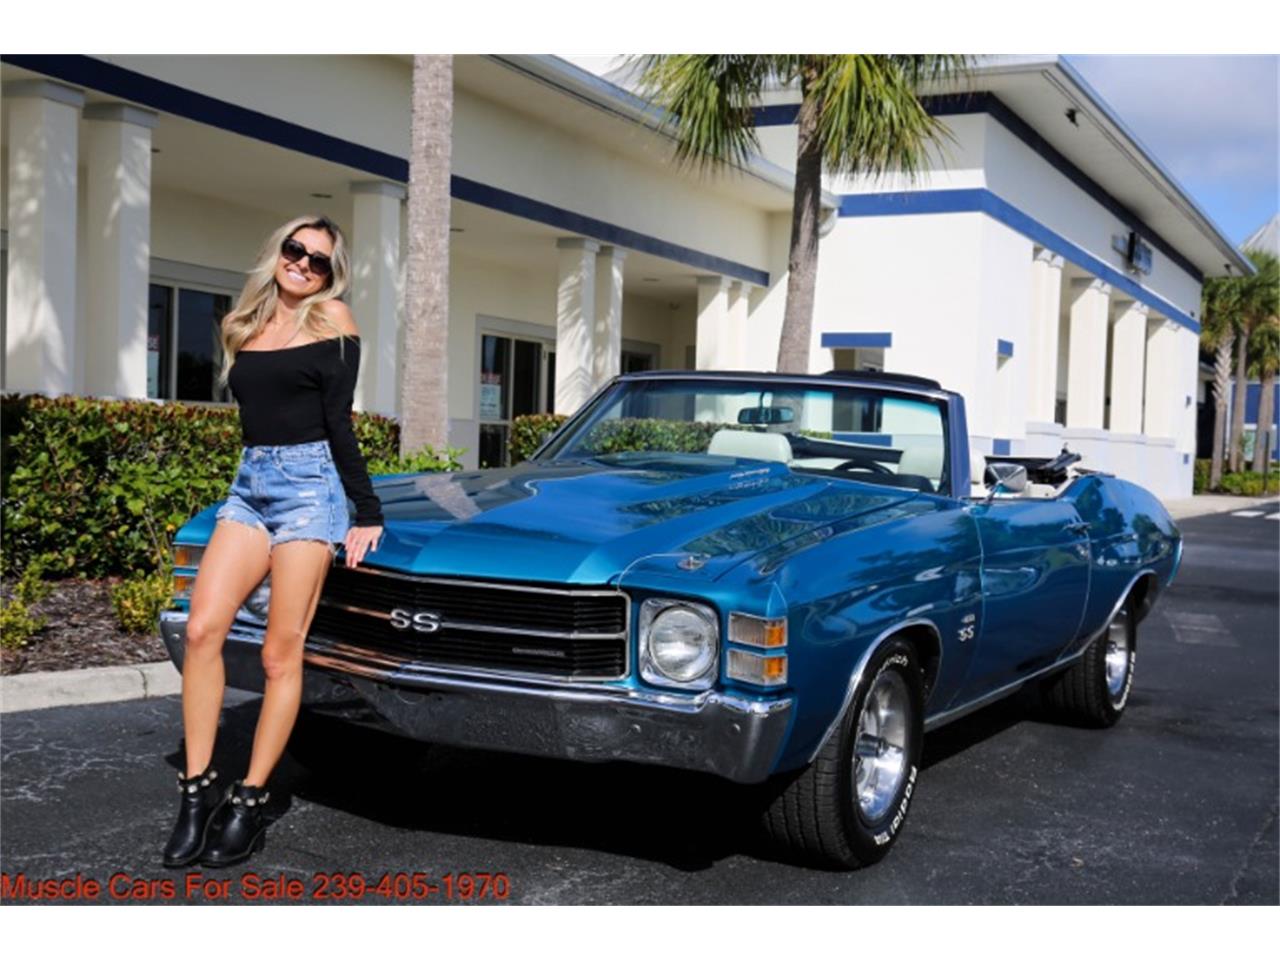 For Sale: 1971 Chevrolet Chevelle SS in Fort Myers, Florida for sale in Fort Myers, FL